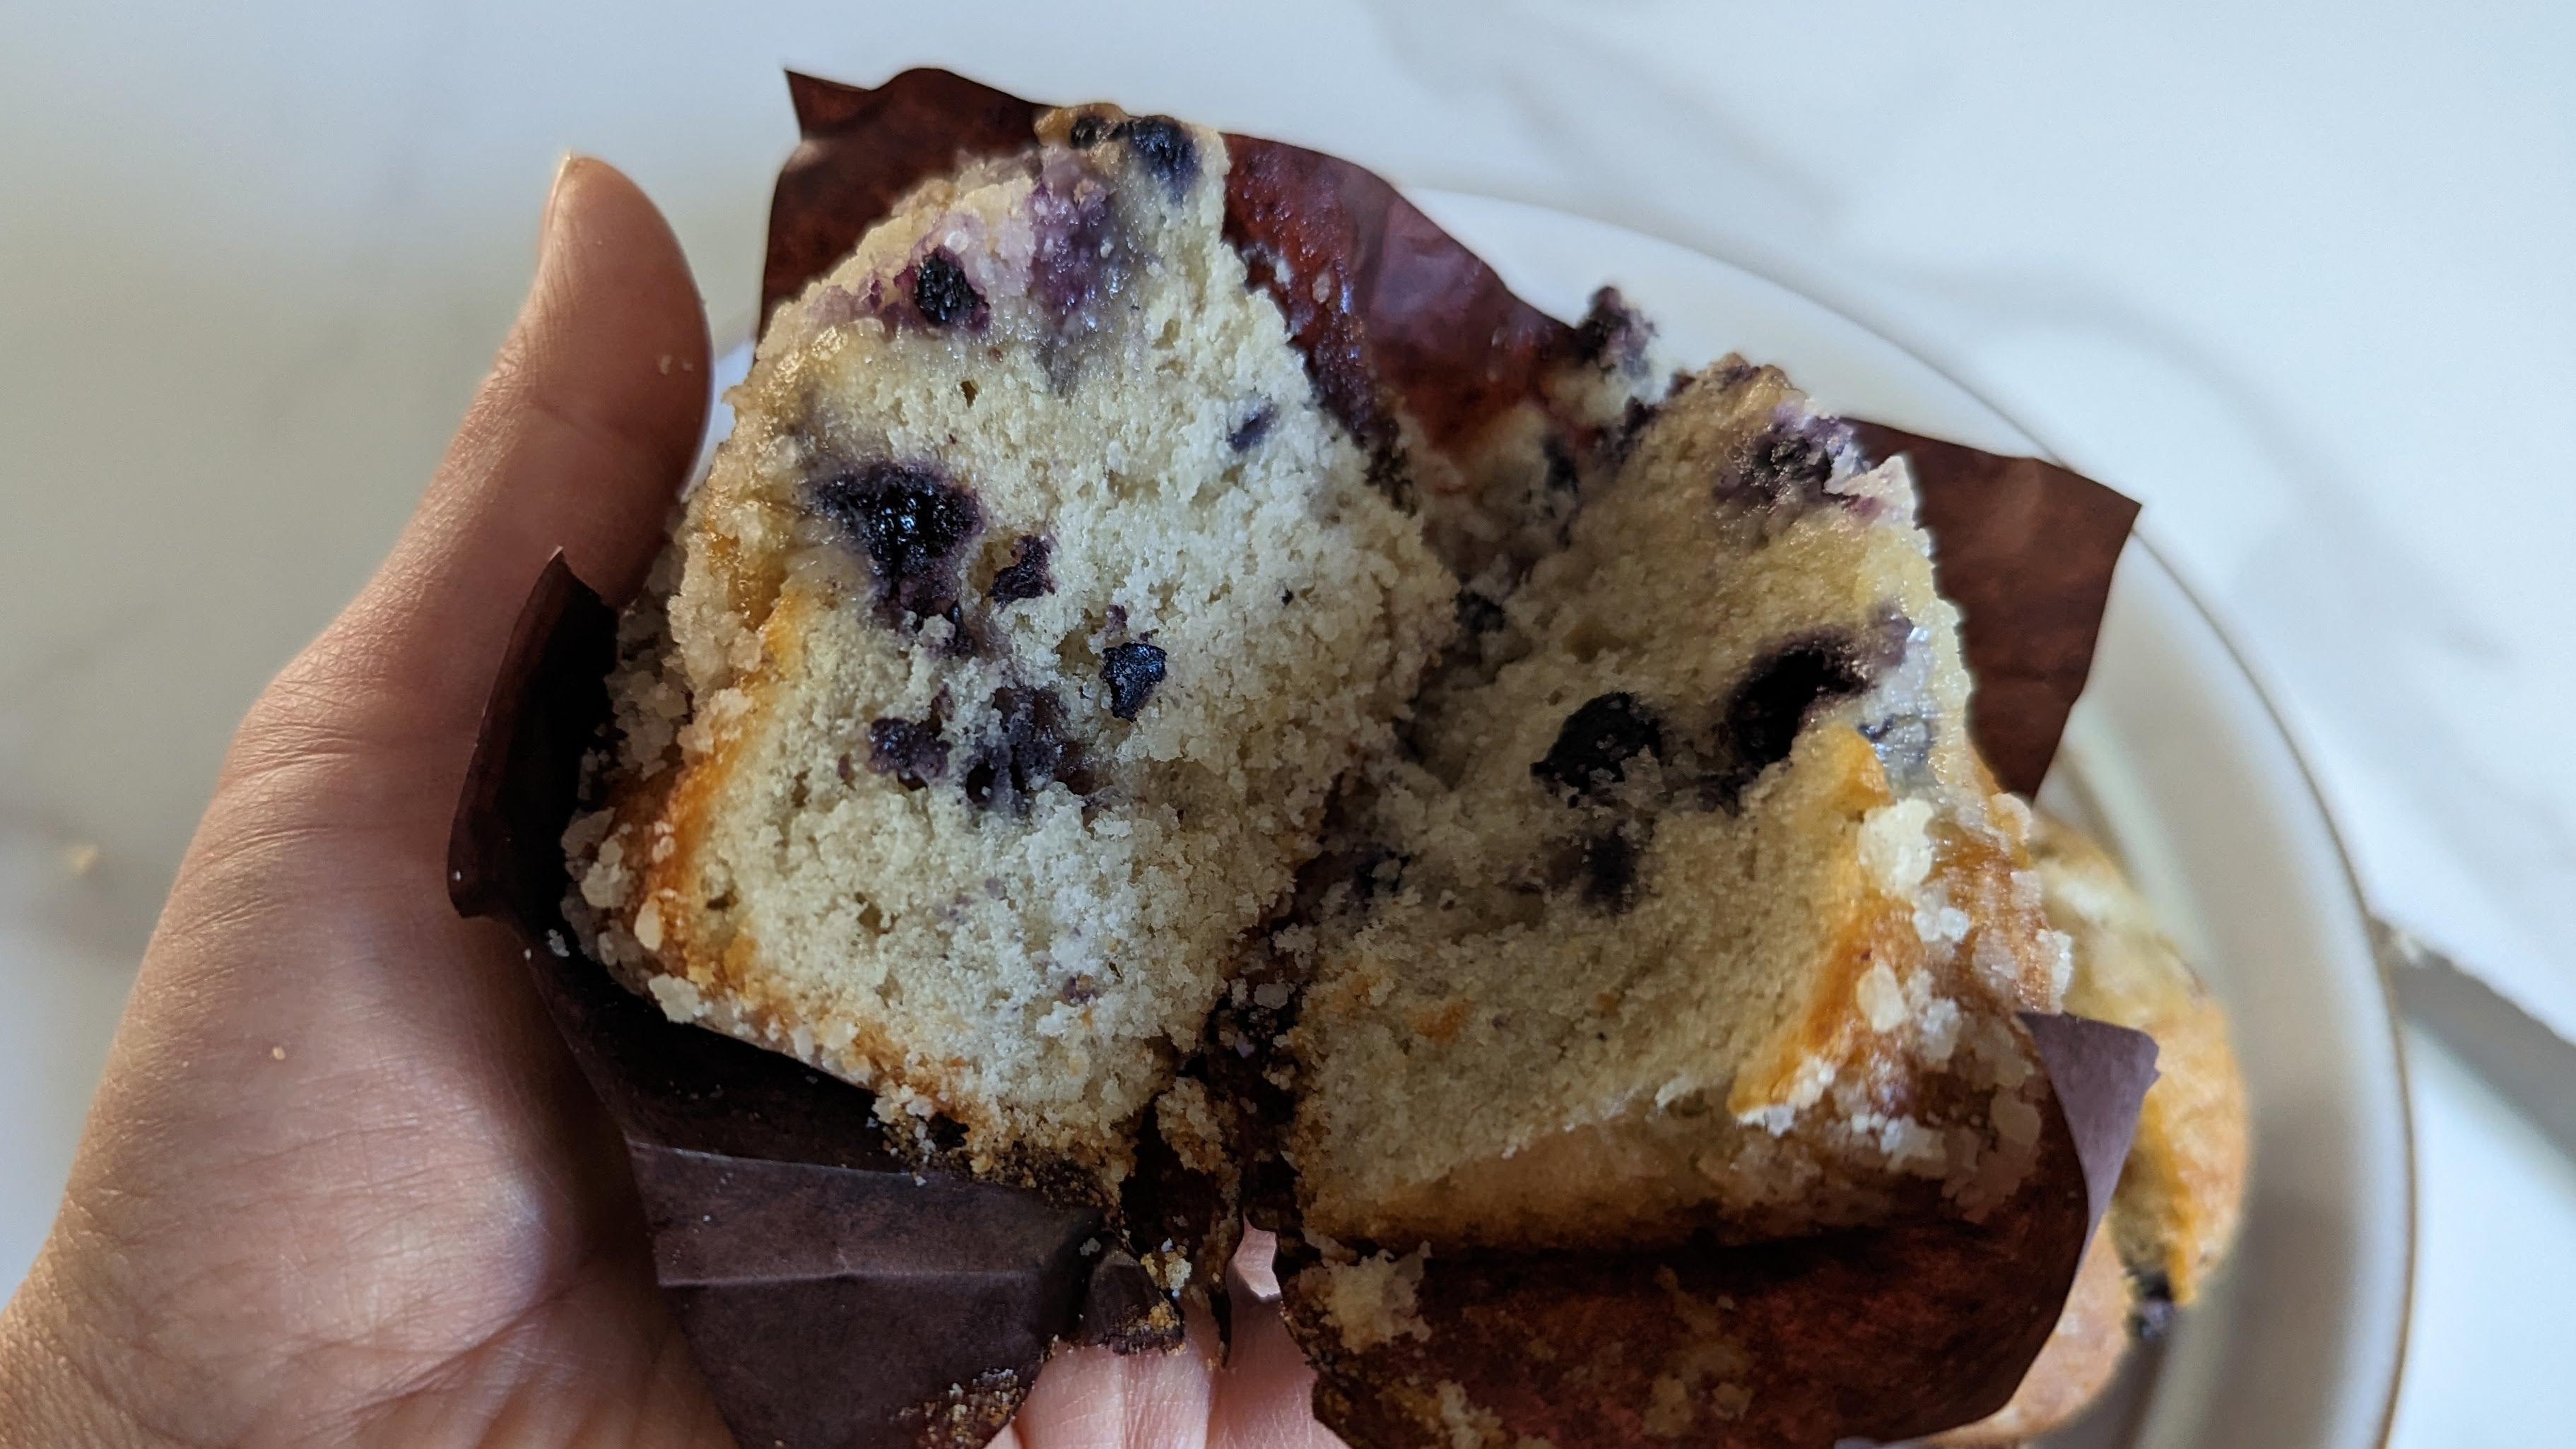 McDonald's Blueberry Muffin cross-section